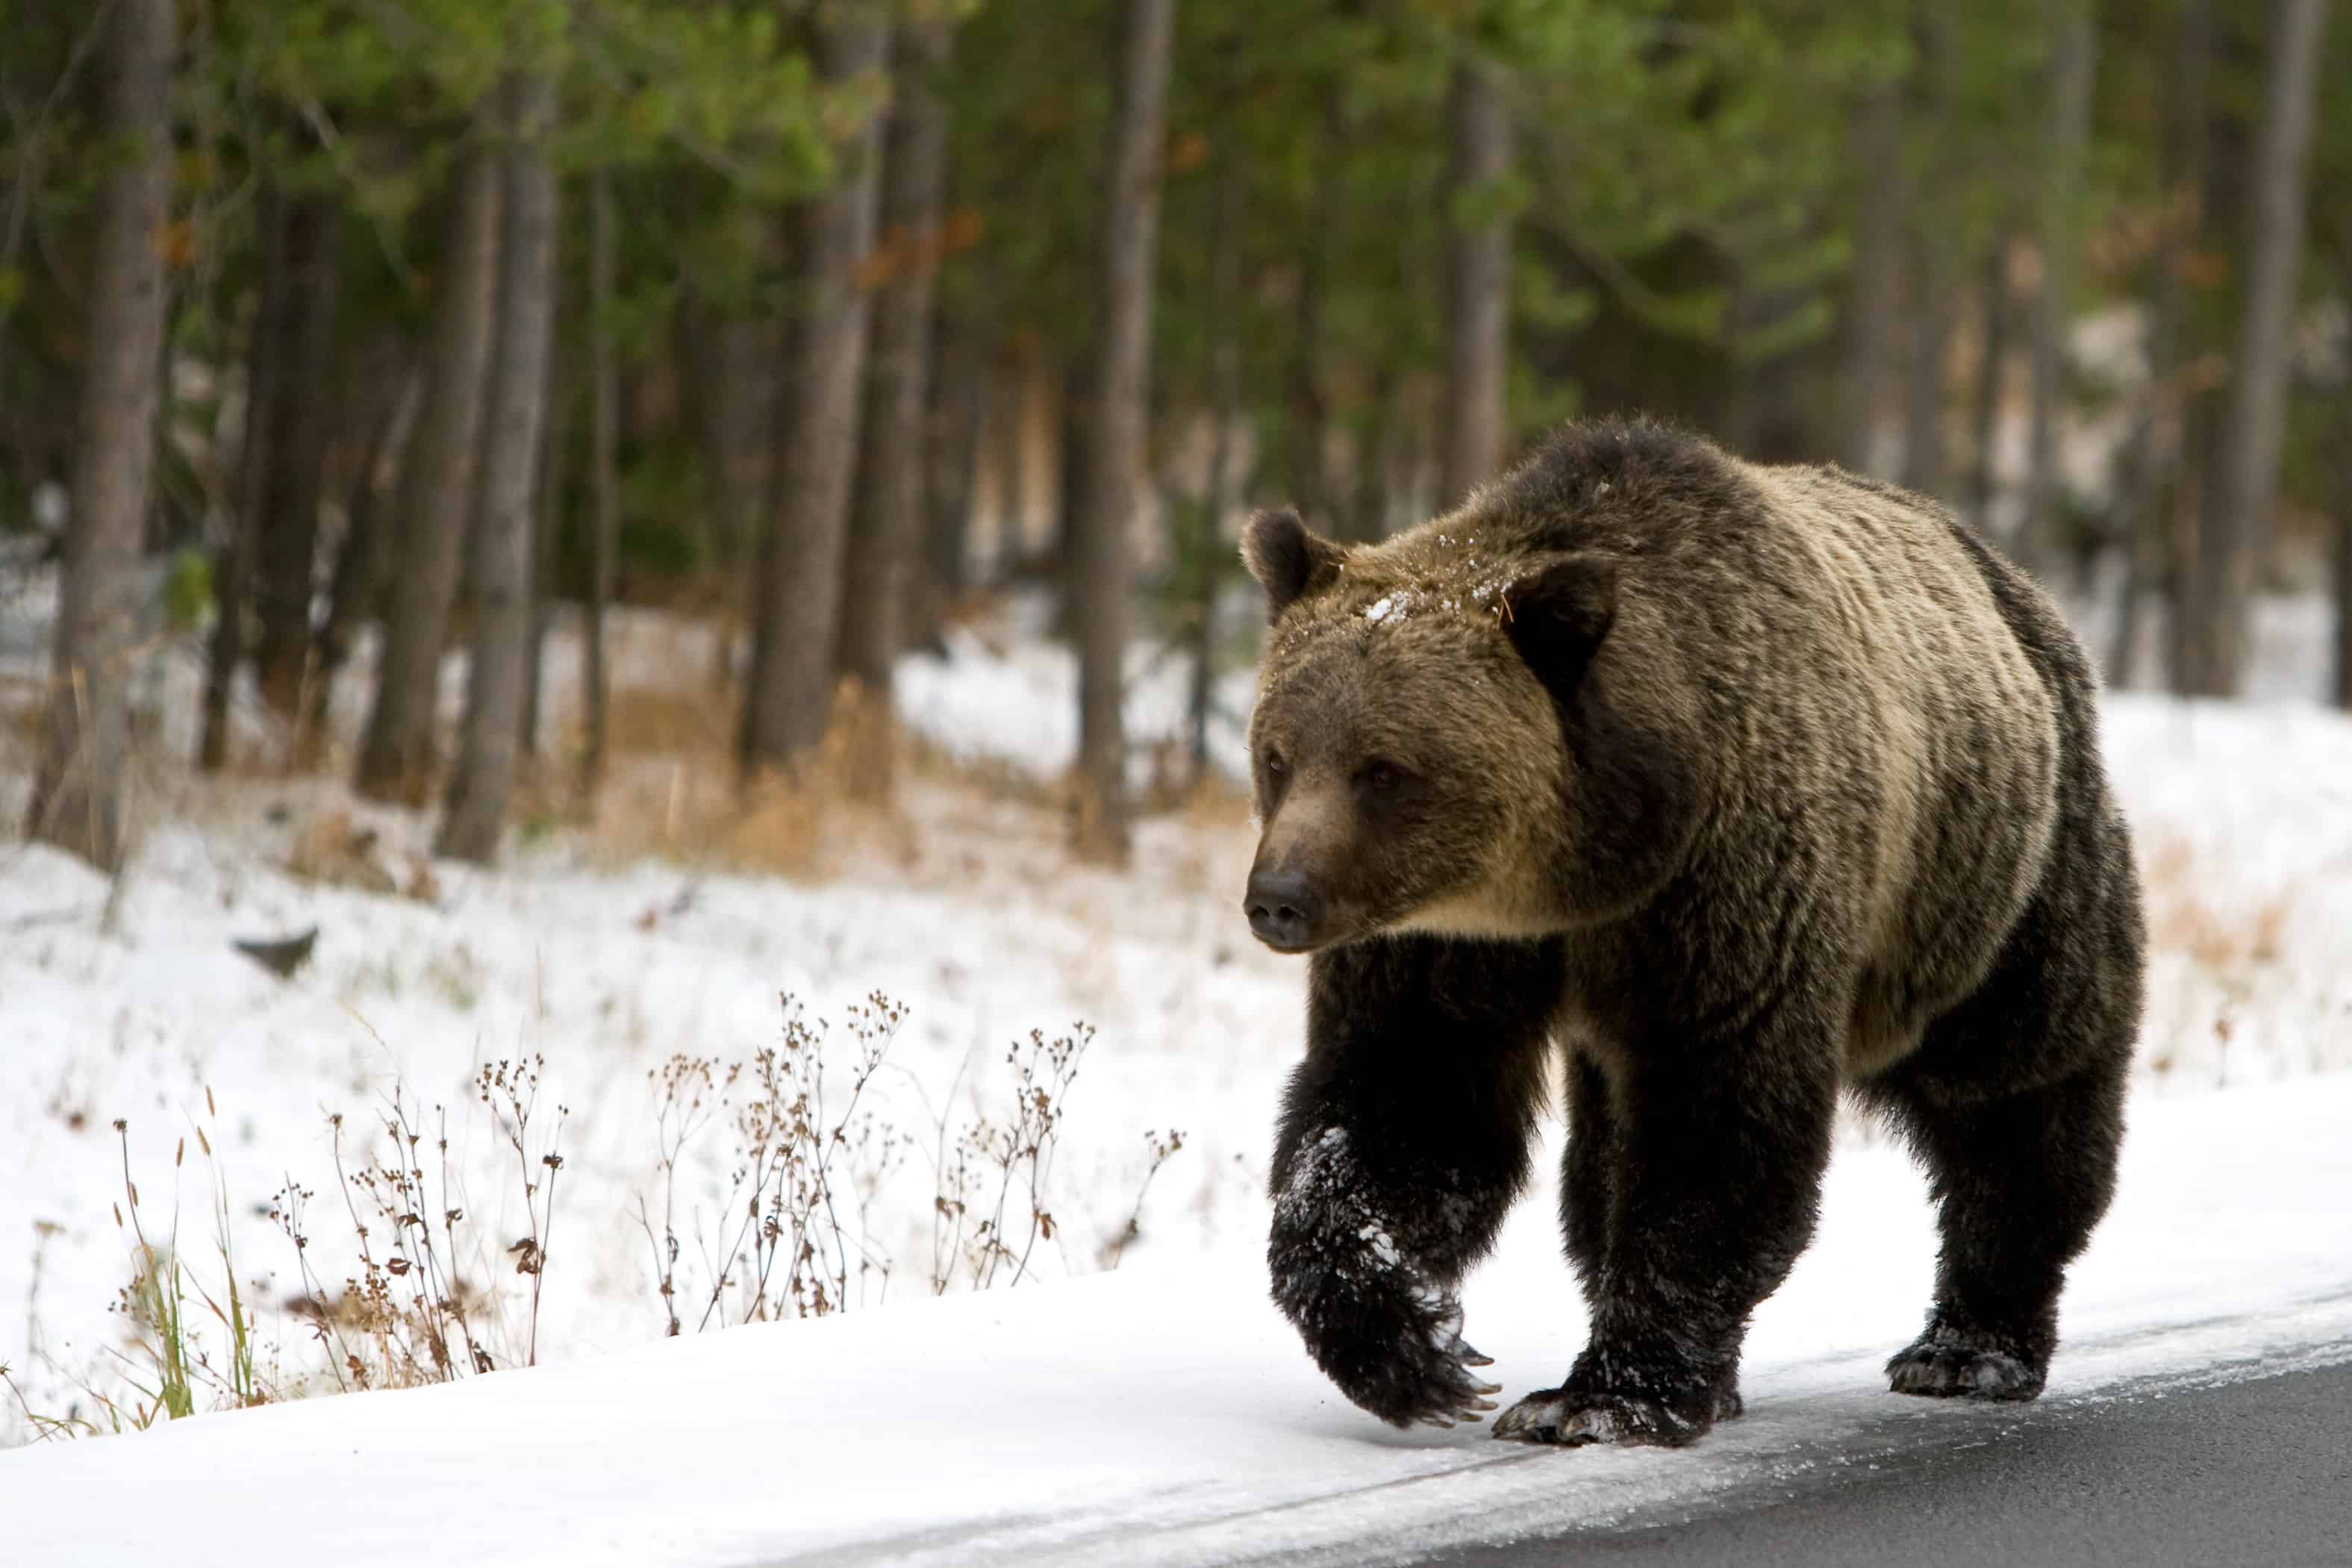 Yellowstone grizzly bears can be at their most dangerous when they first emerge from hibernation.